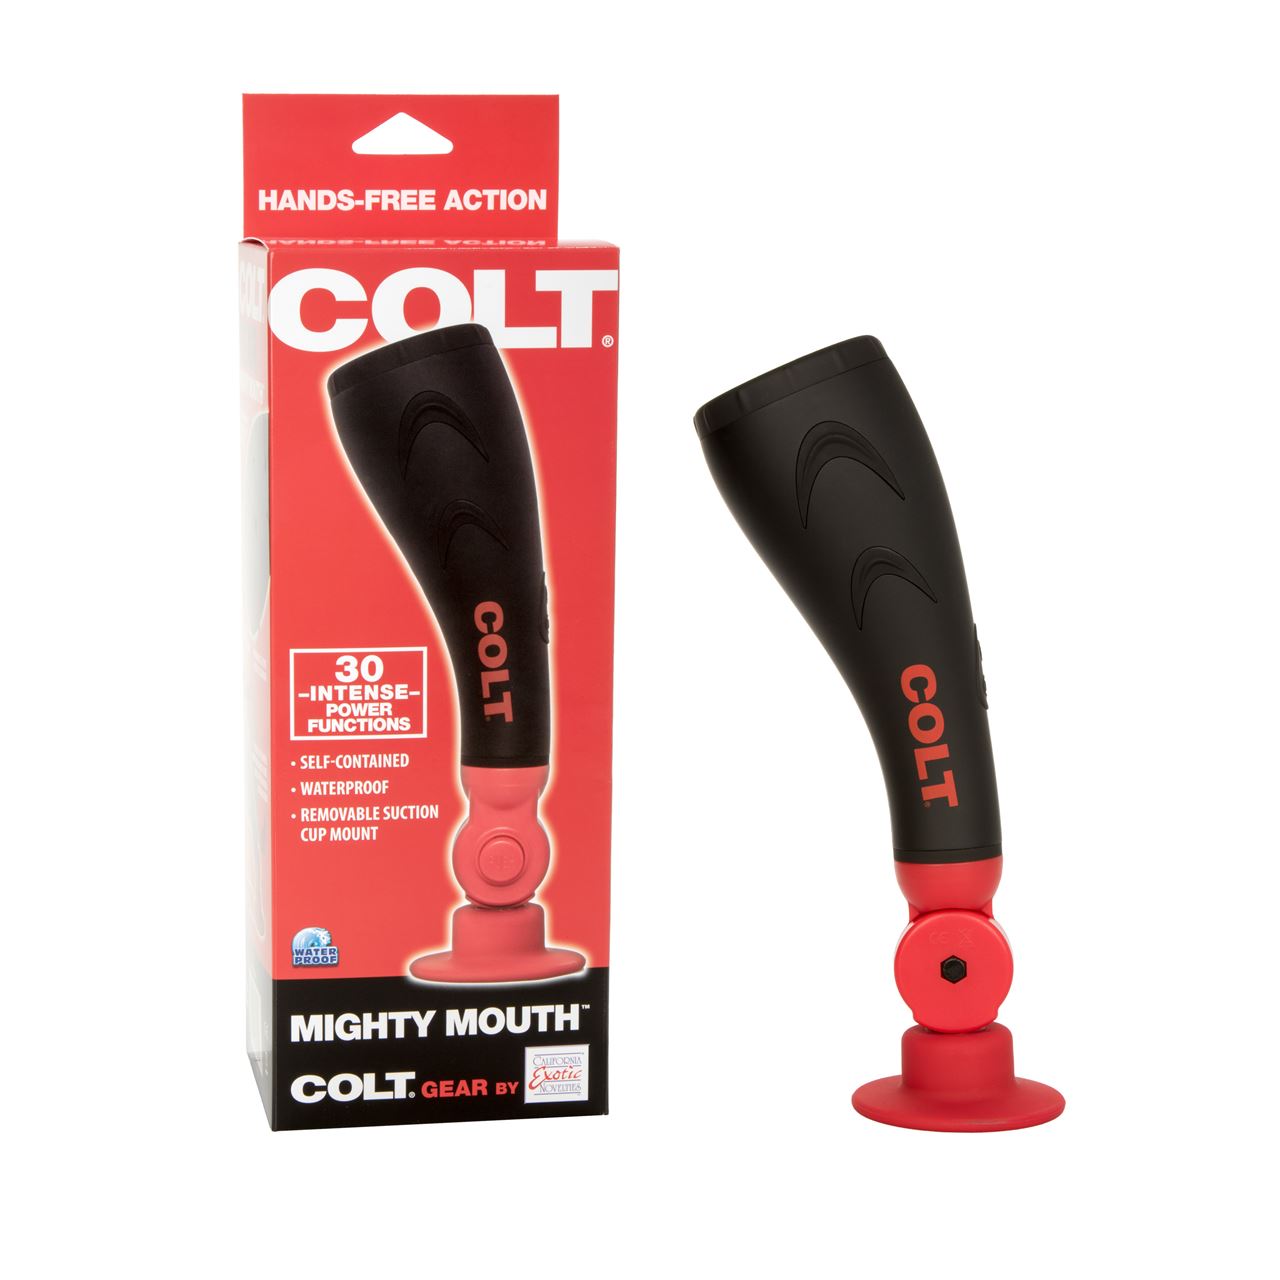 COLT-Mighty-Mouth